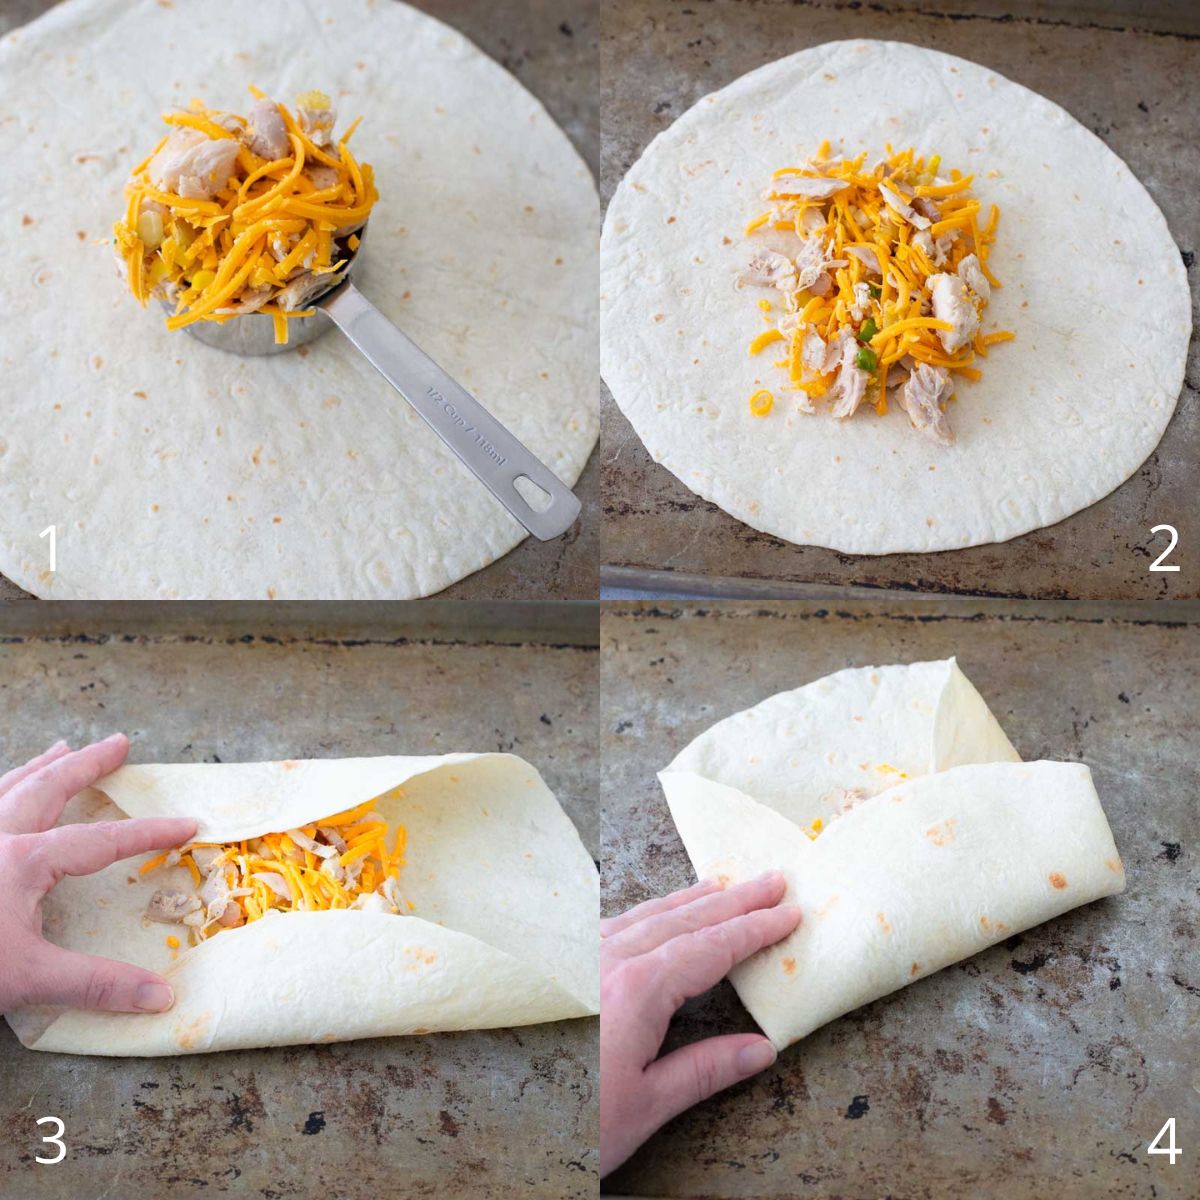 The step by step photos show how to roll a burrito.